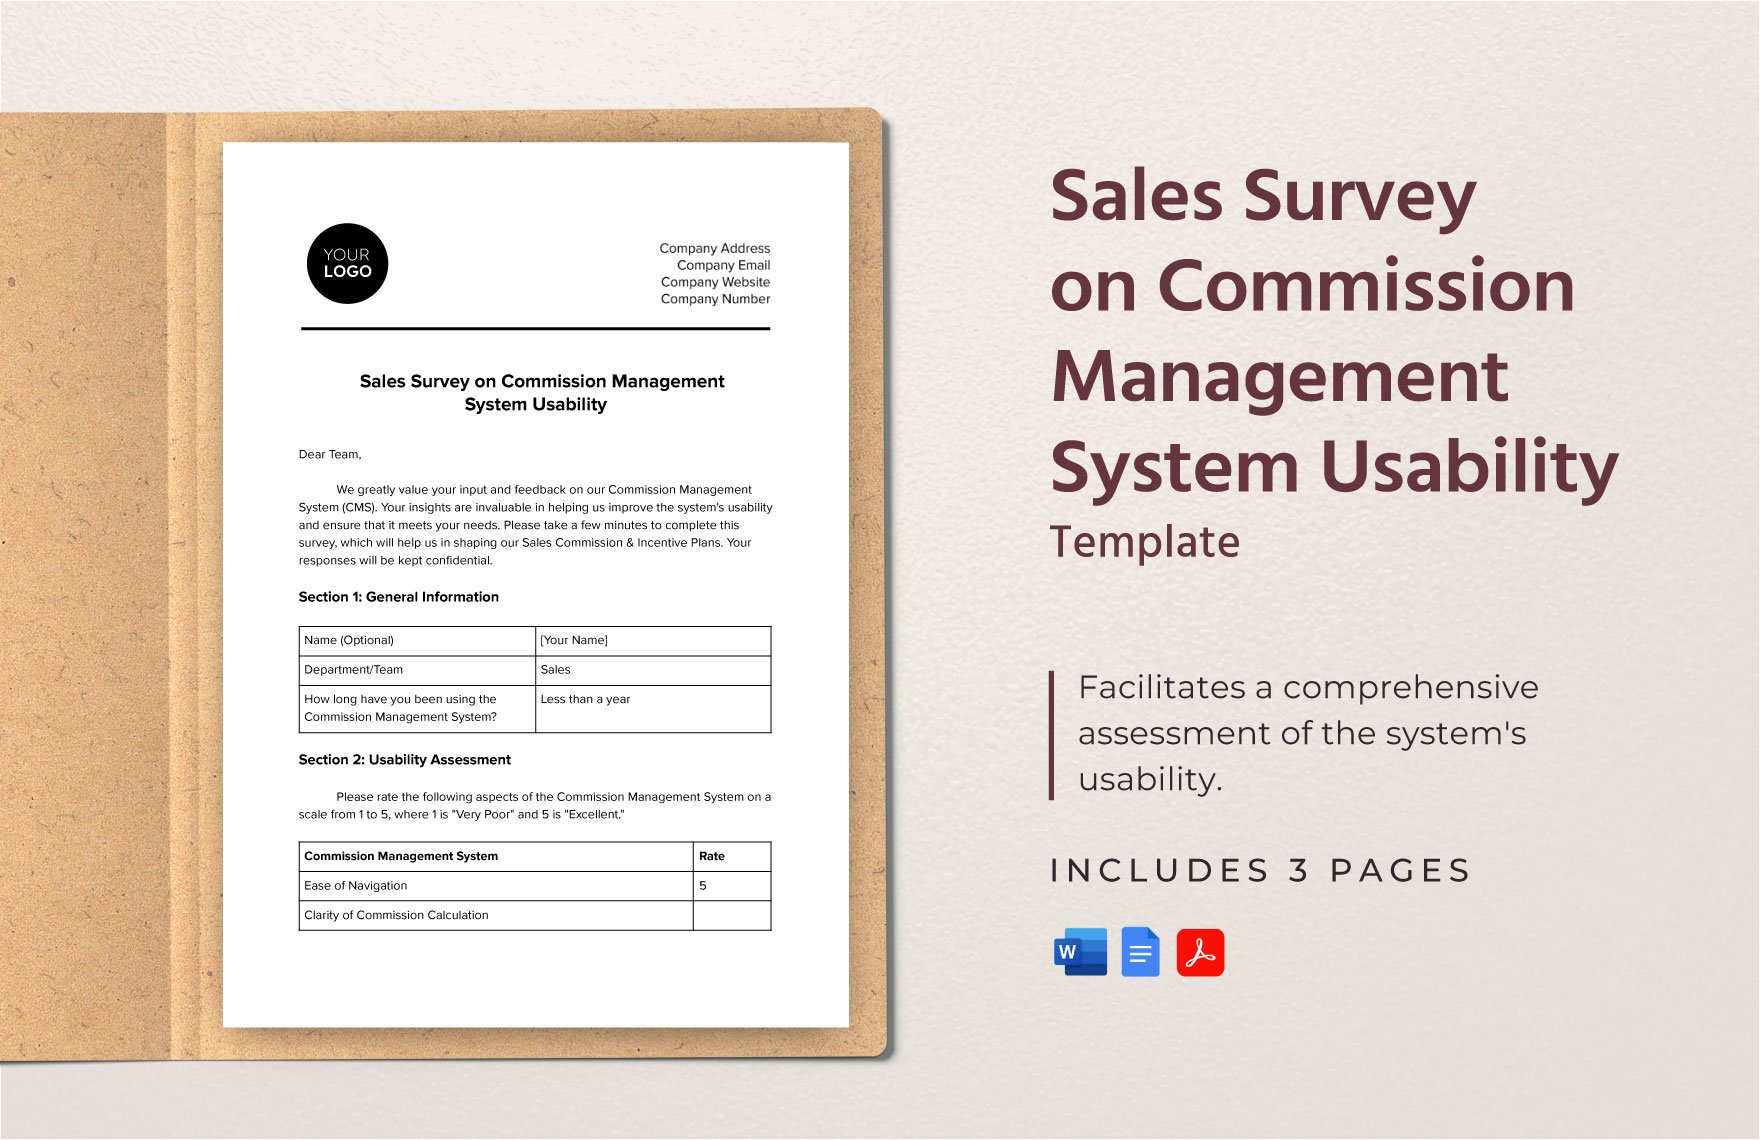 Sales Survey on Commission Management System Usability Template